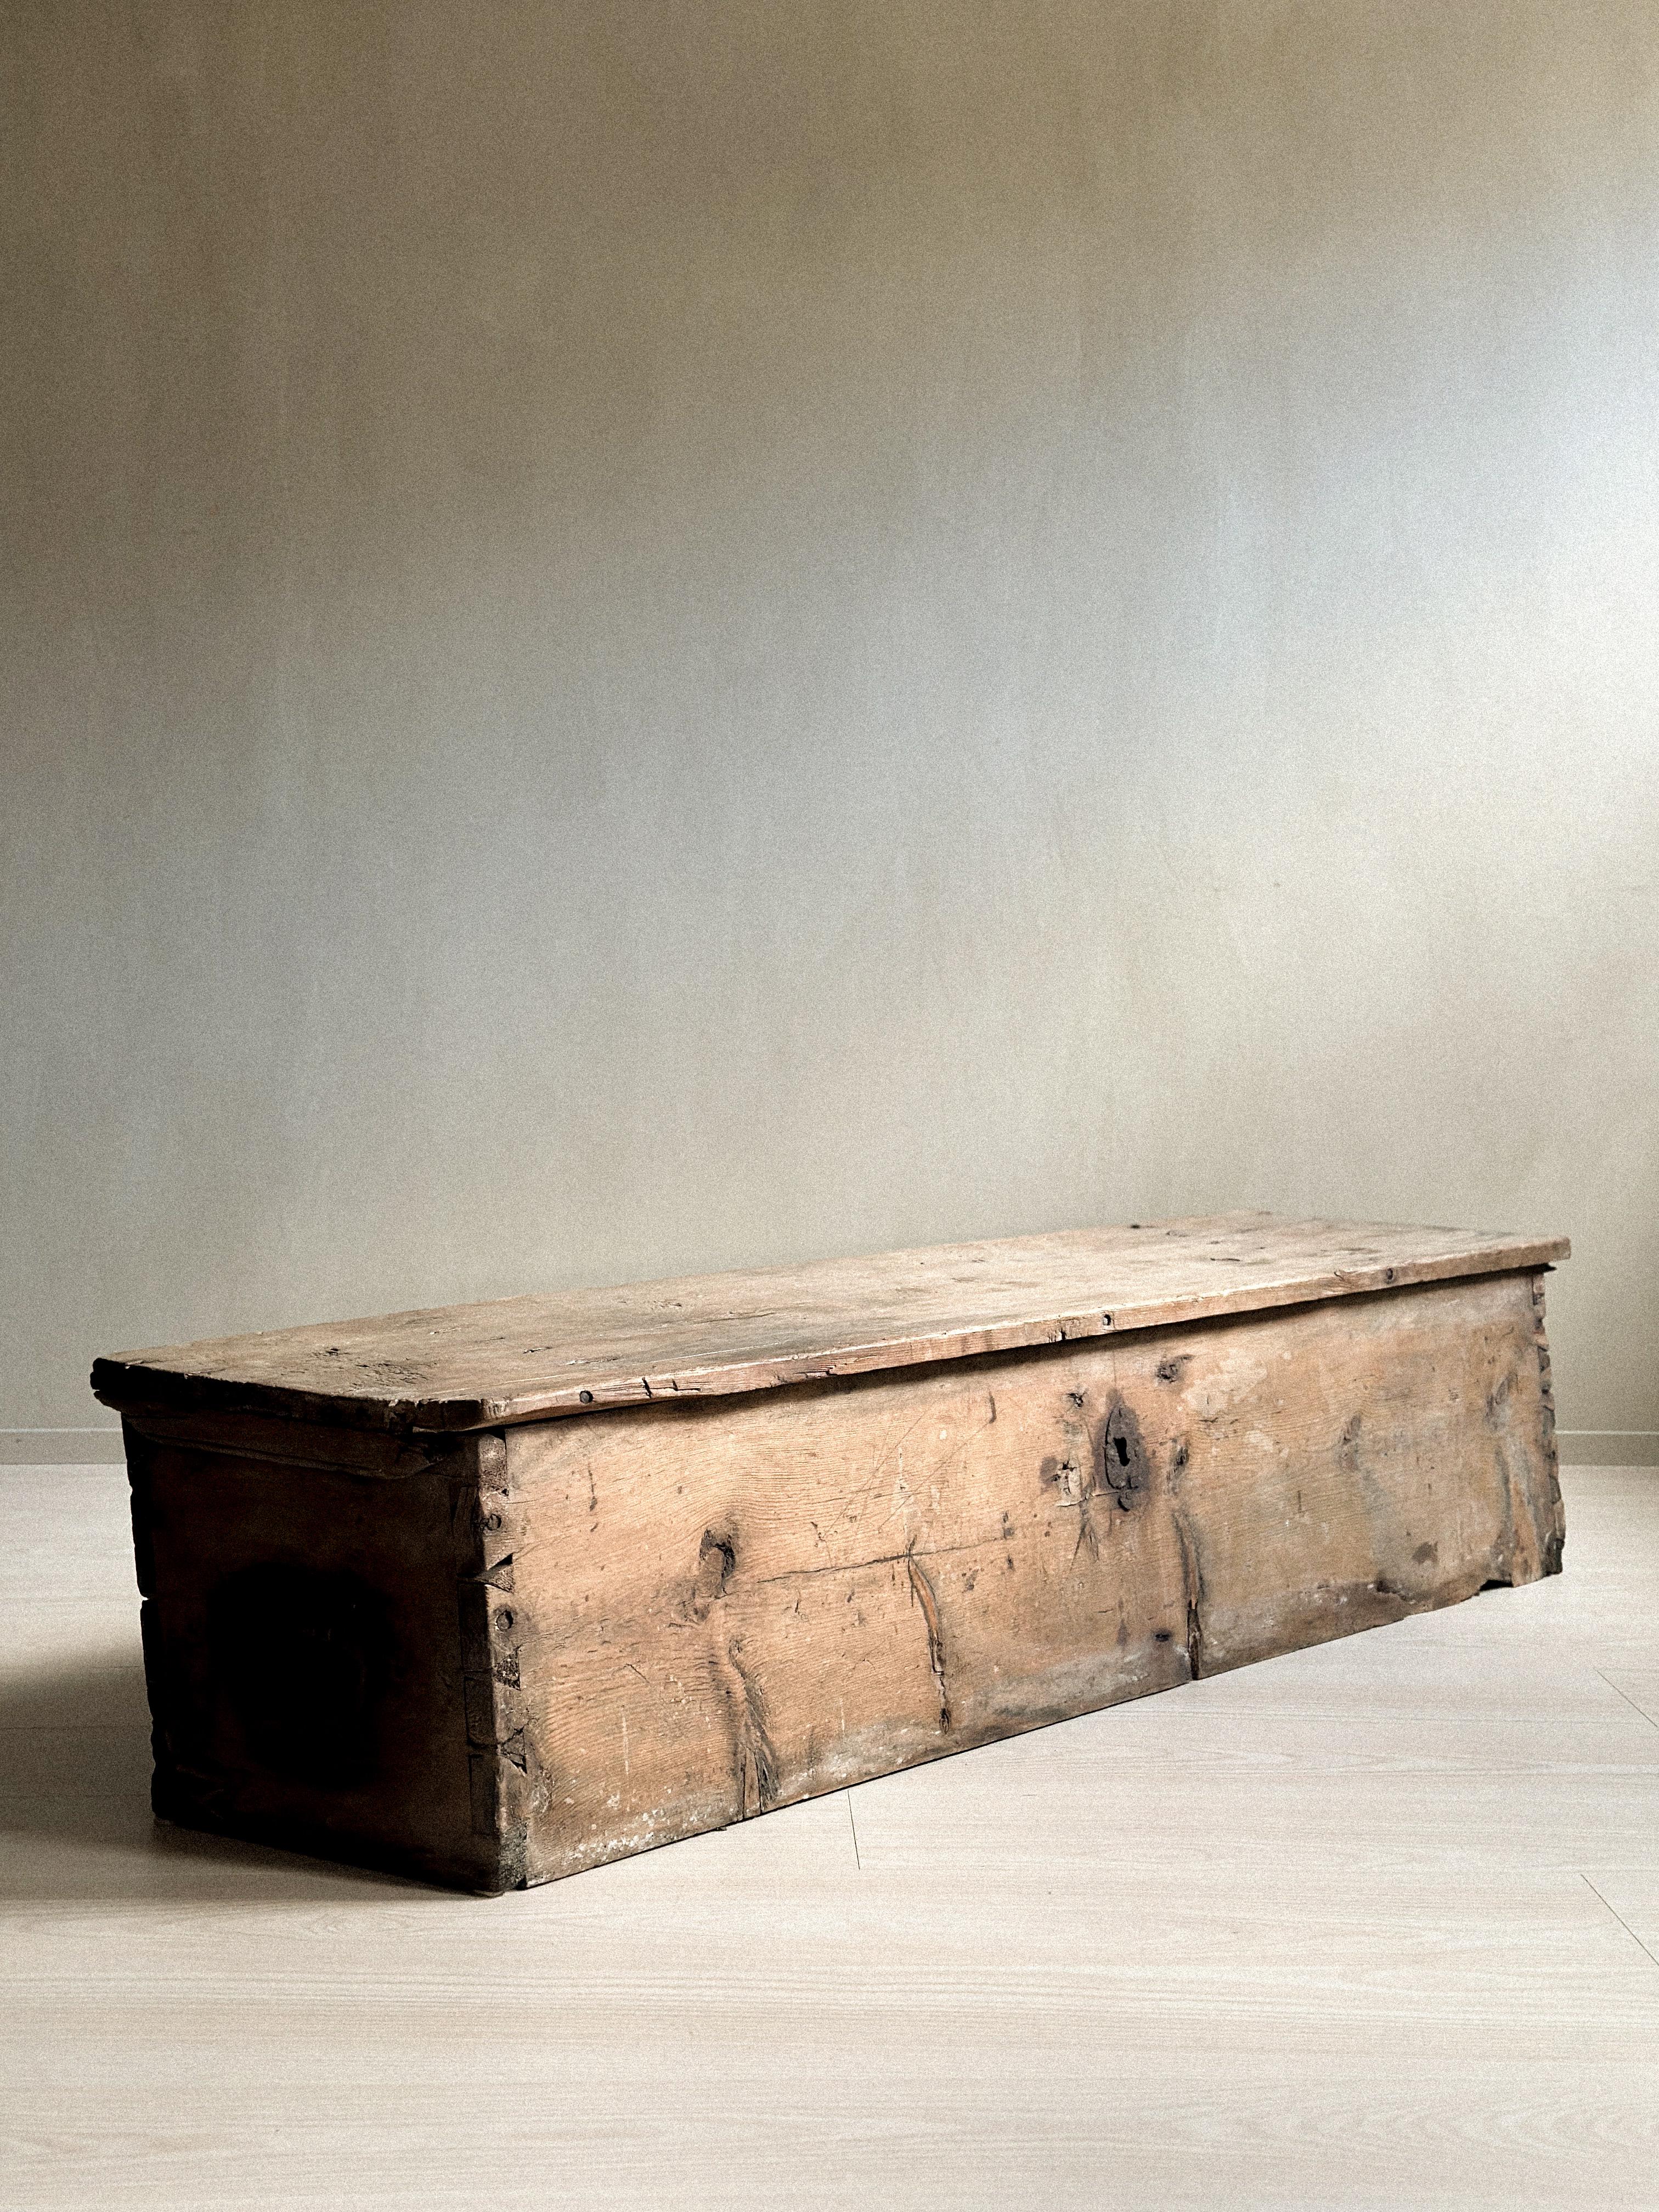 A large antique wabi sabi chest with heavy patina from age and use. From around 1800s in Norway, Scandinavia. 

